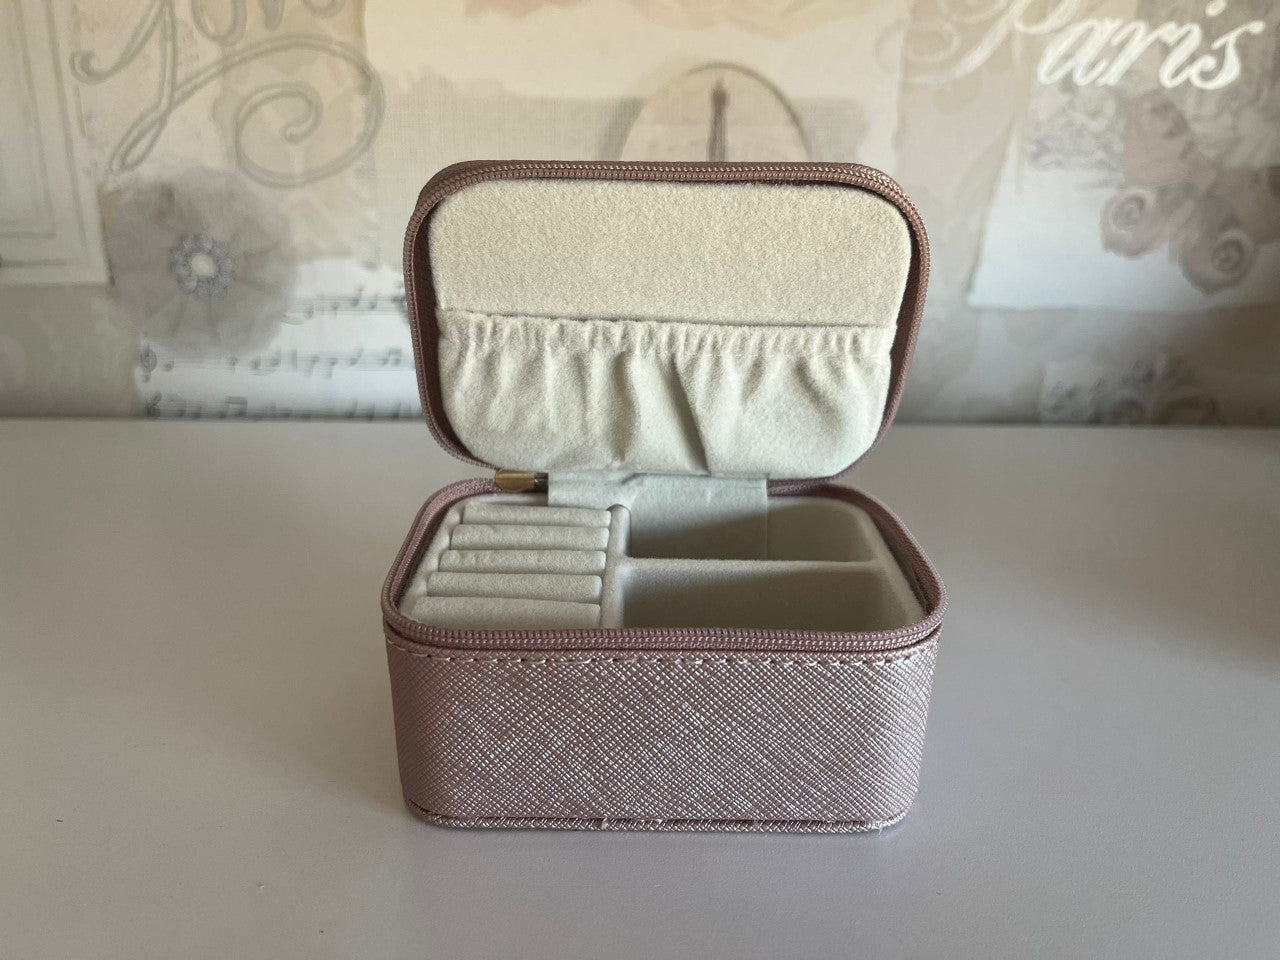 Personalised Jewellery box - never let anyone dull your sparkle Clare